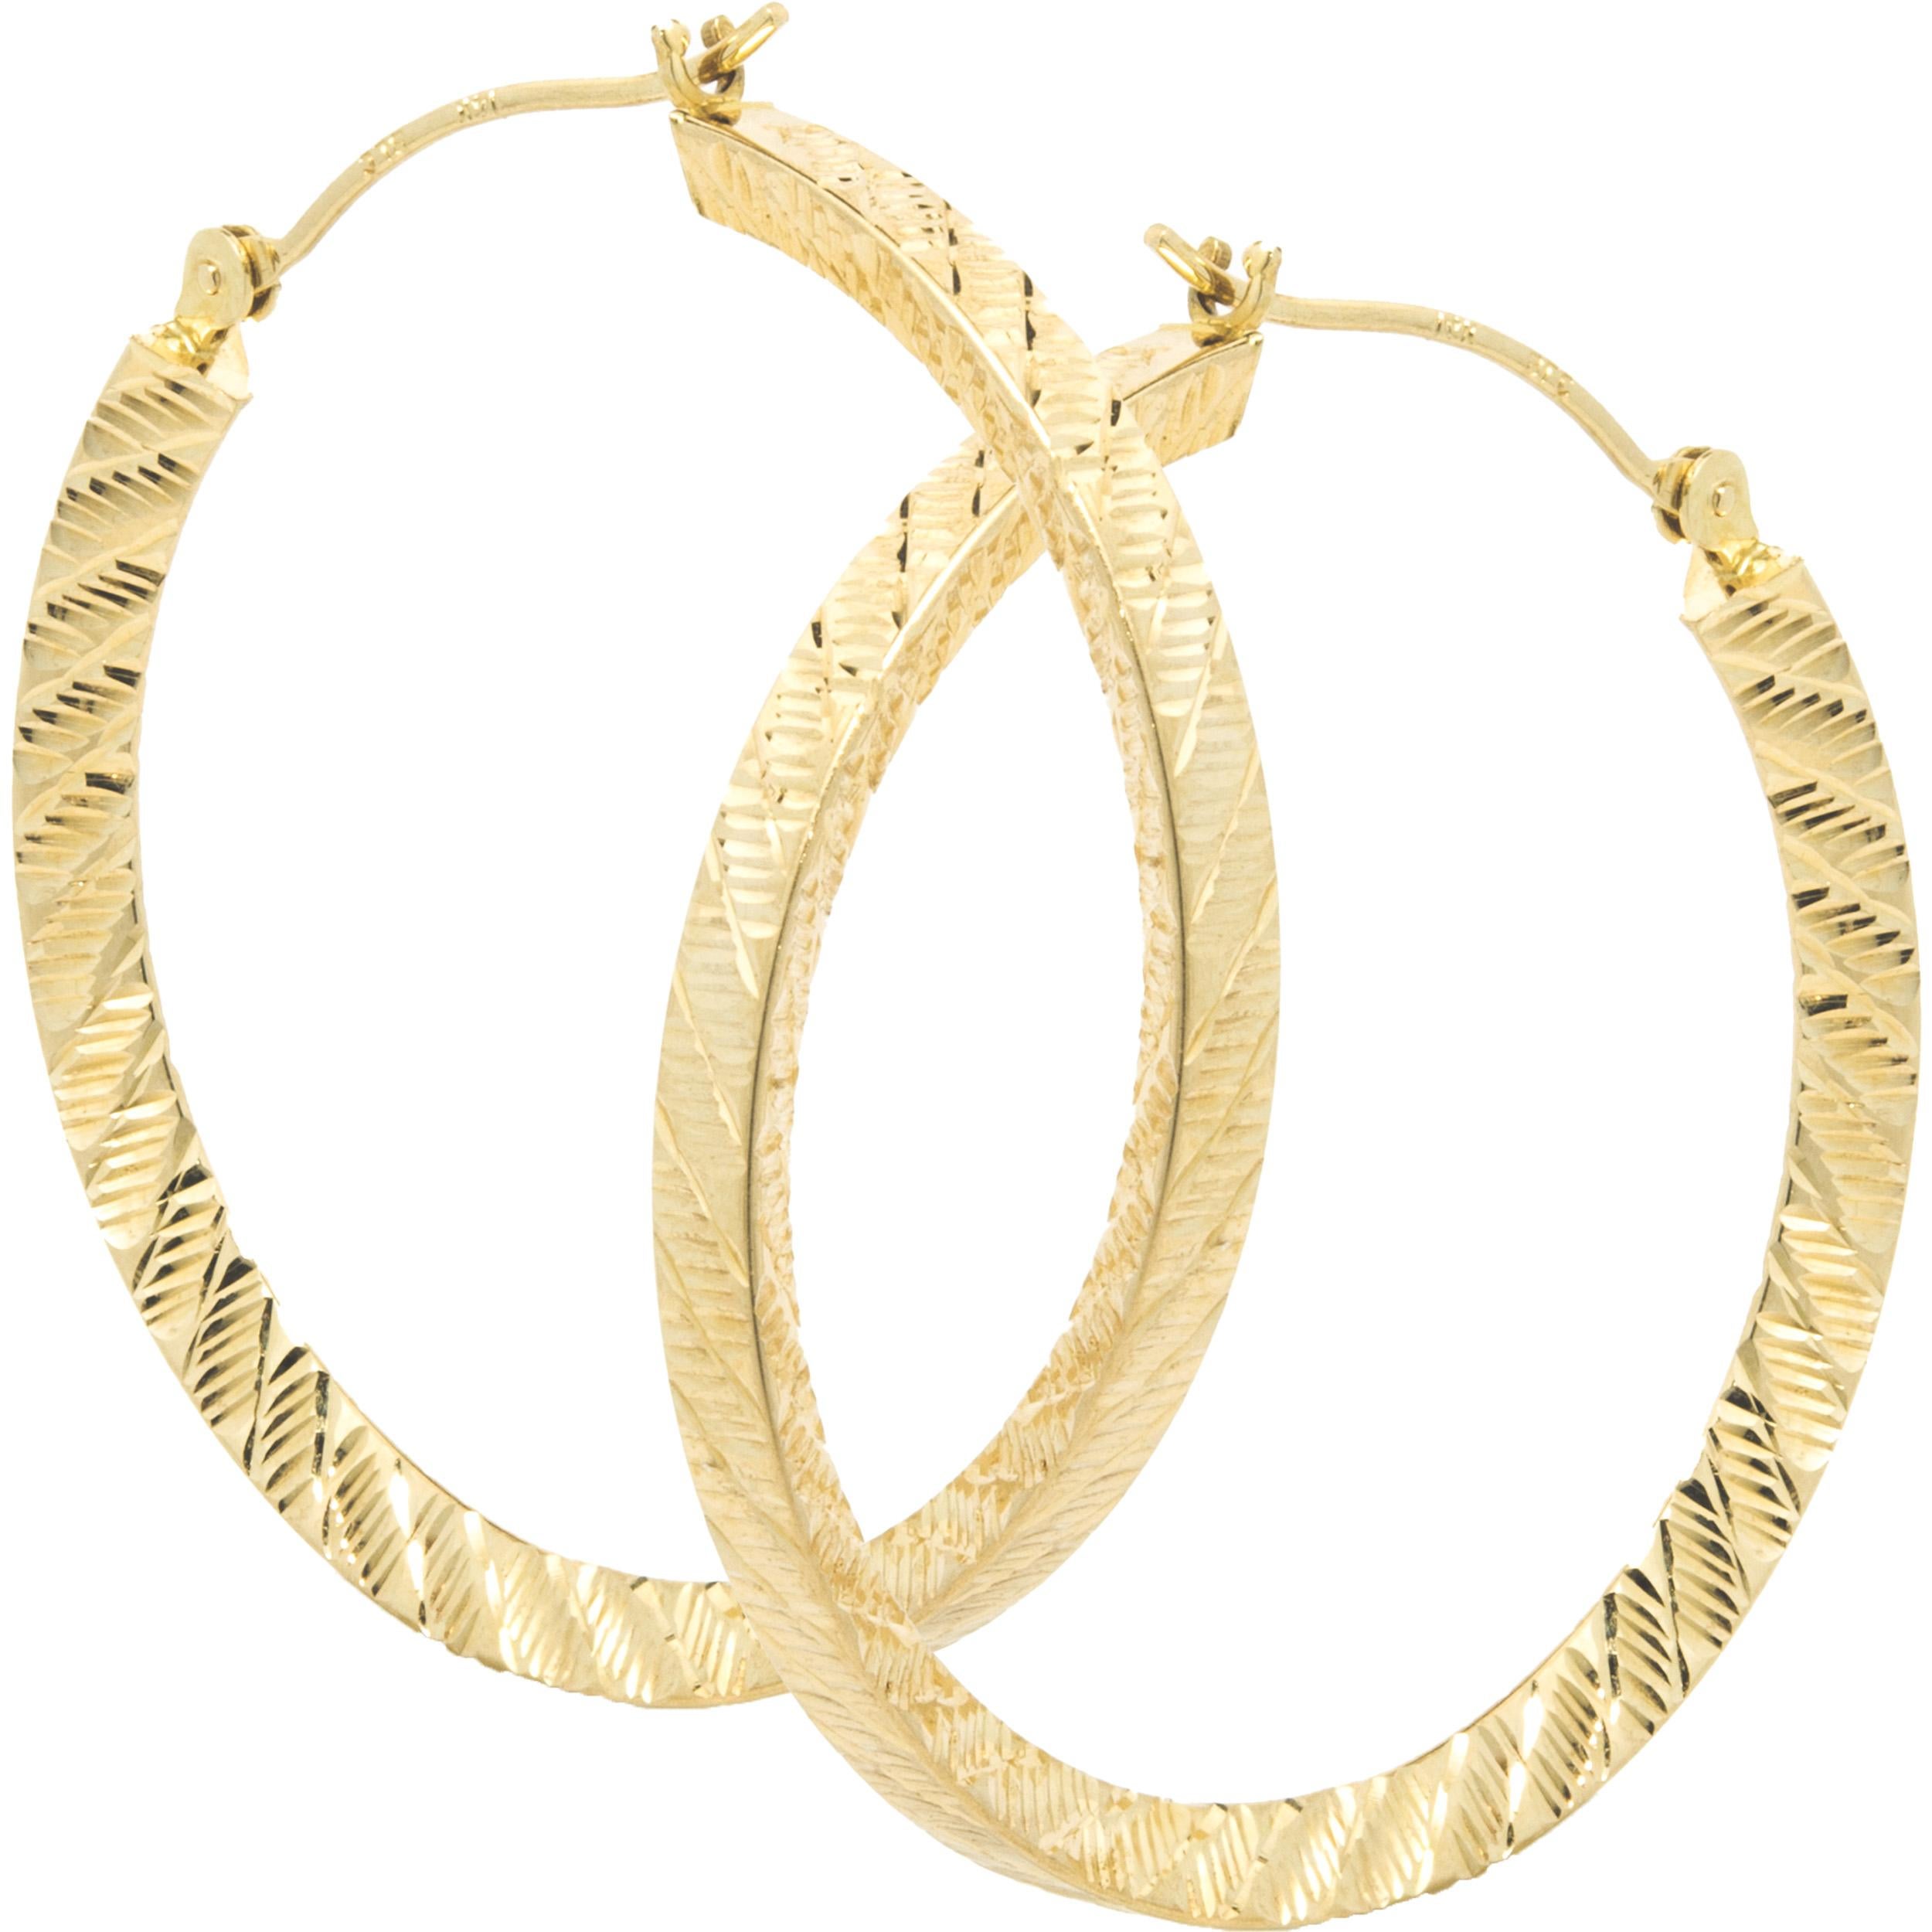 Material: 14K yellow gold
Dimensions: earrings measure 30mm in length
Weight:  1.50 grams